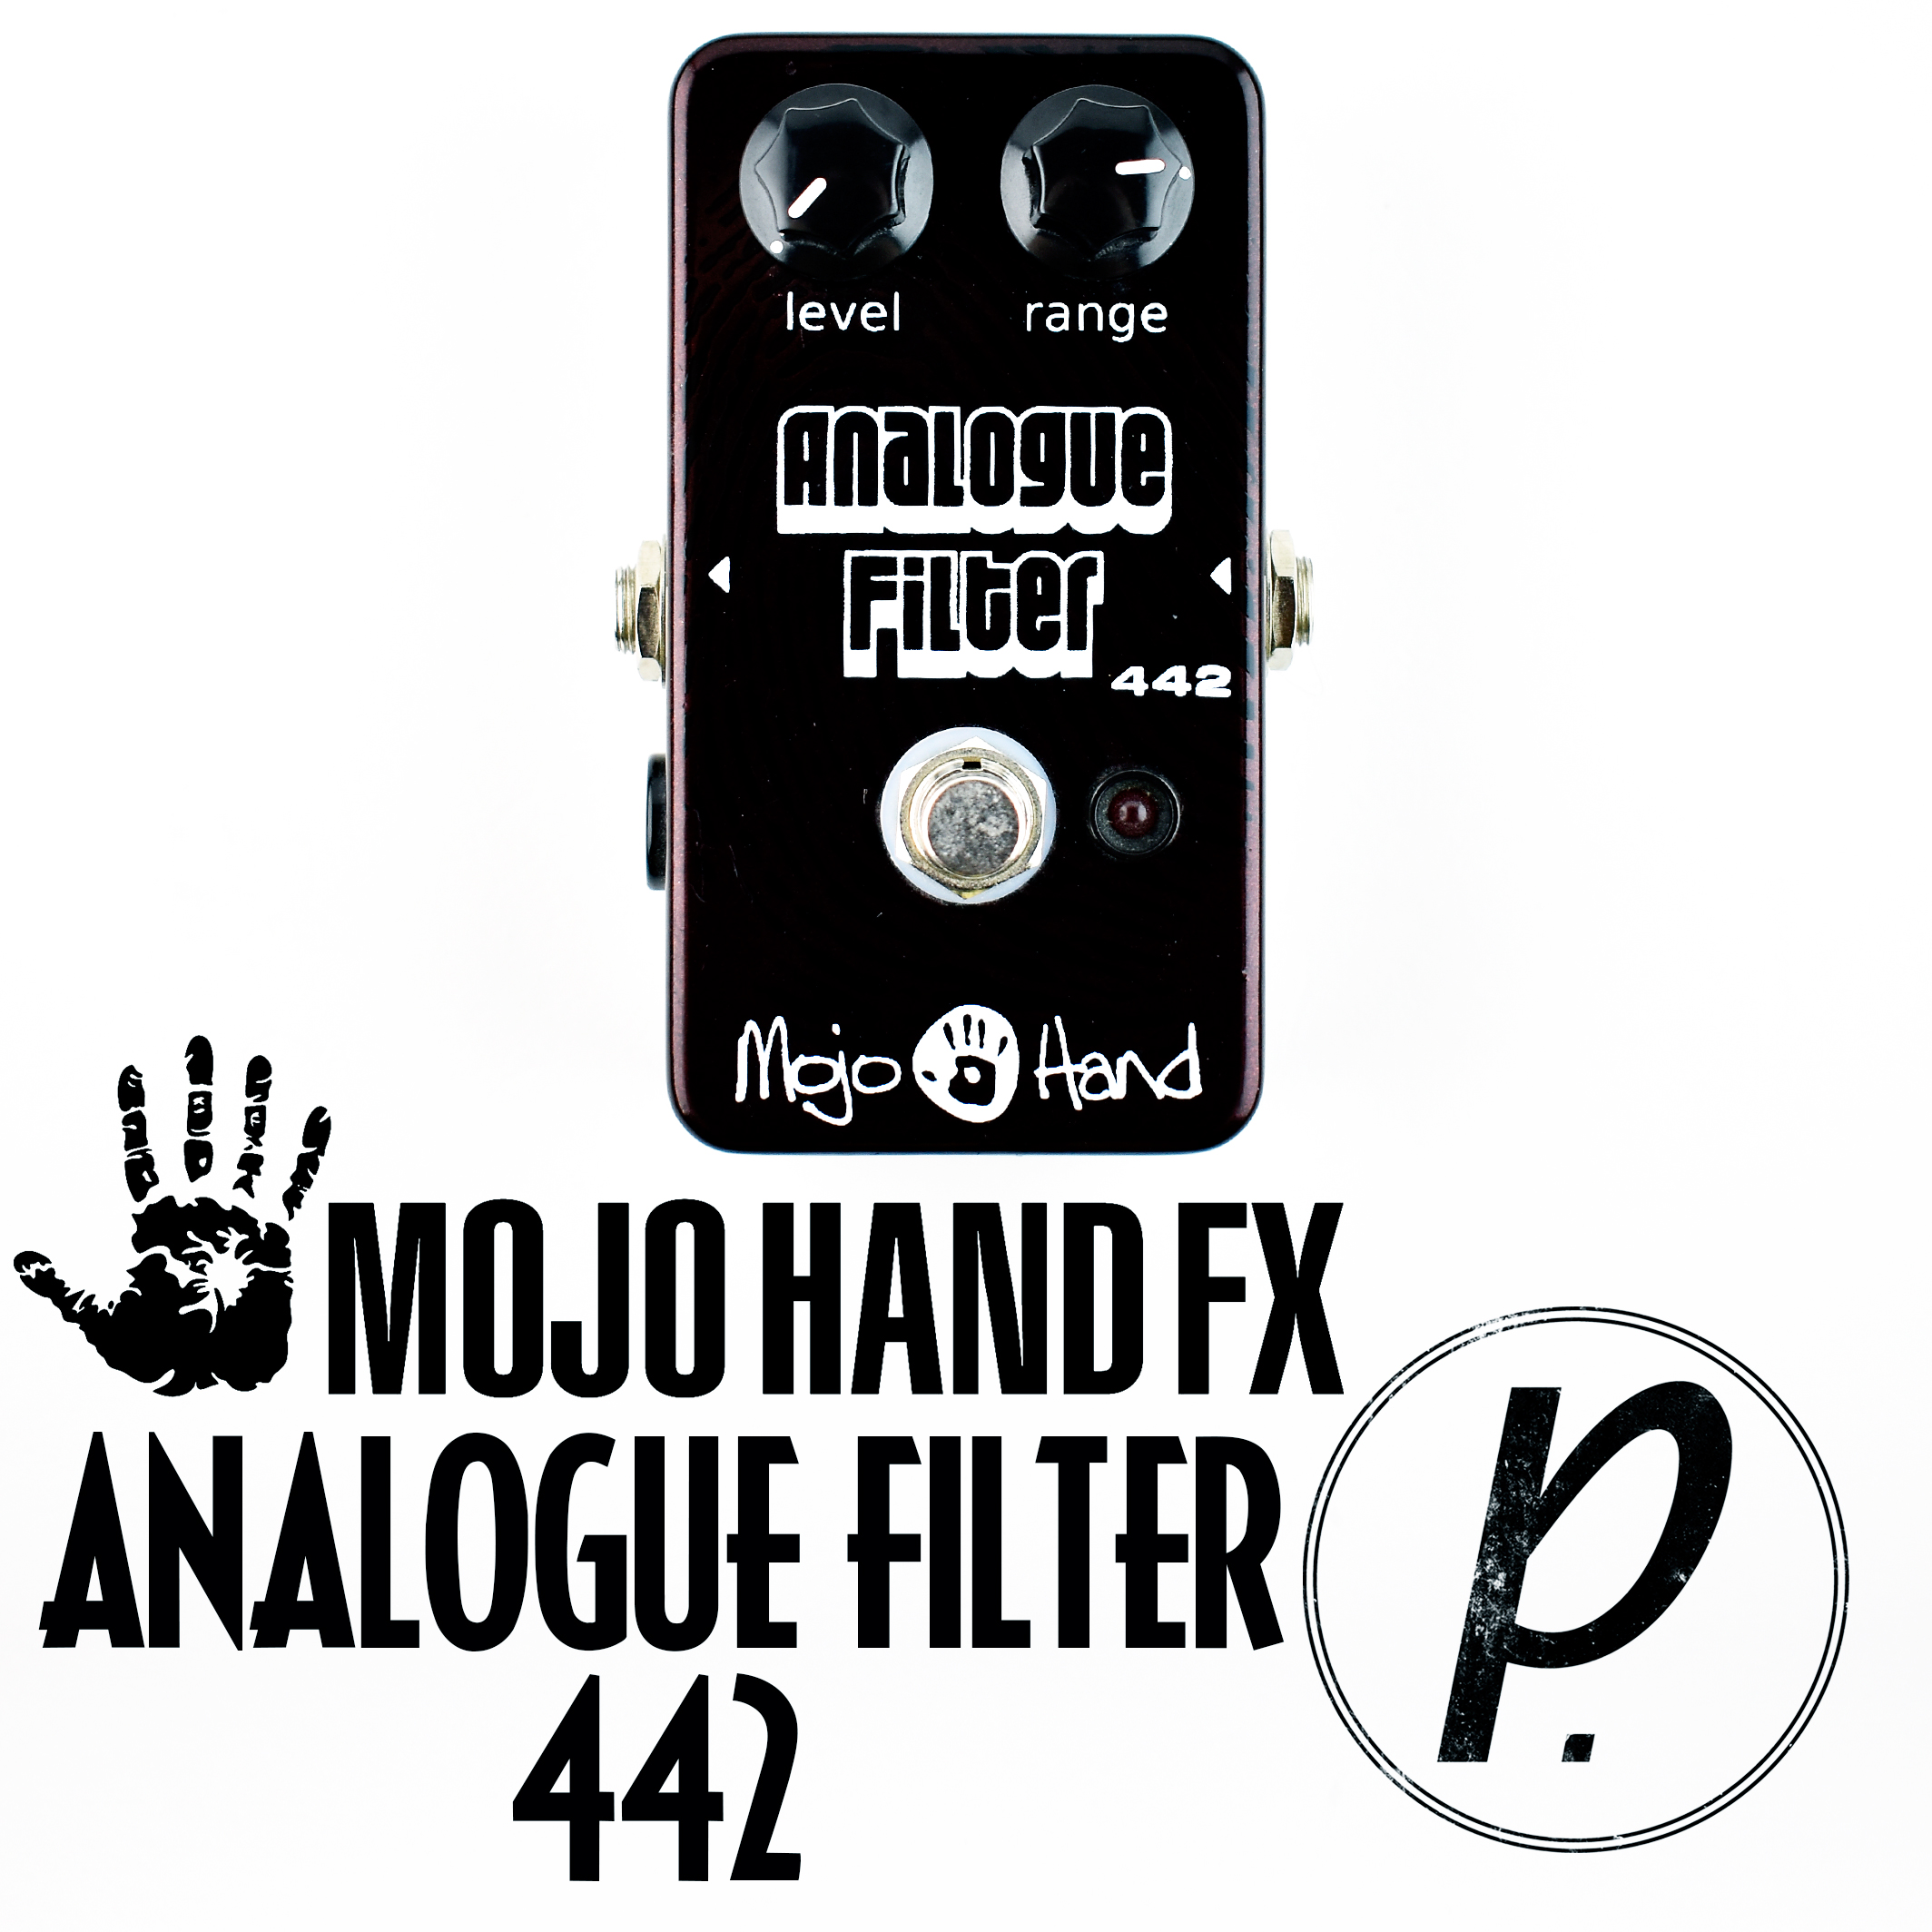 Mojo Hand FX Analogue Filter 442 - Pedal of the Day